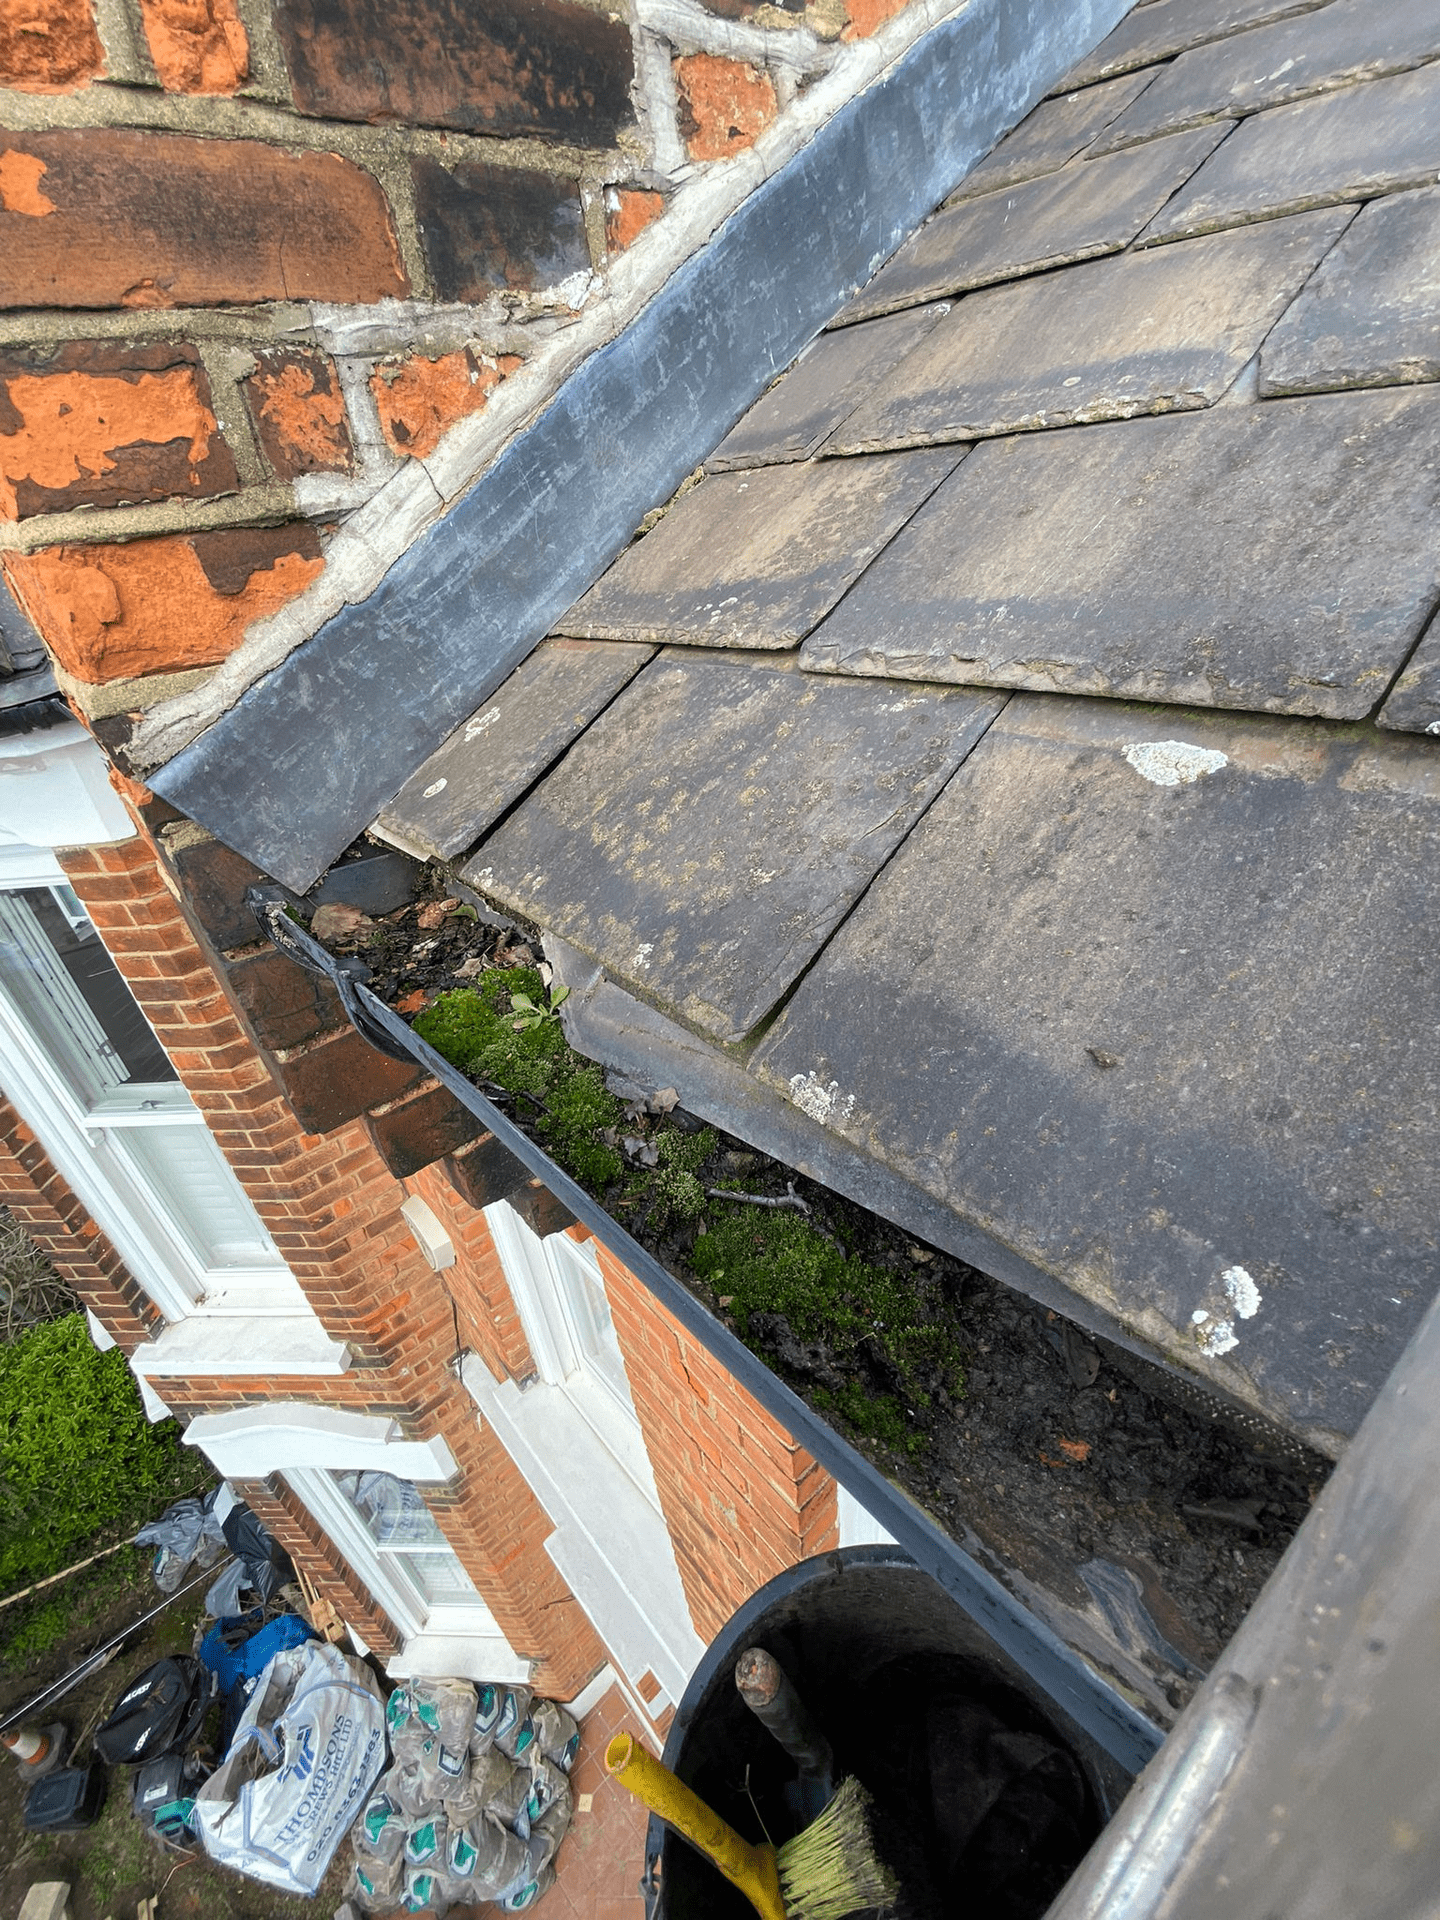 Vaccum method used to clean dirty gutters